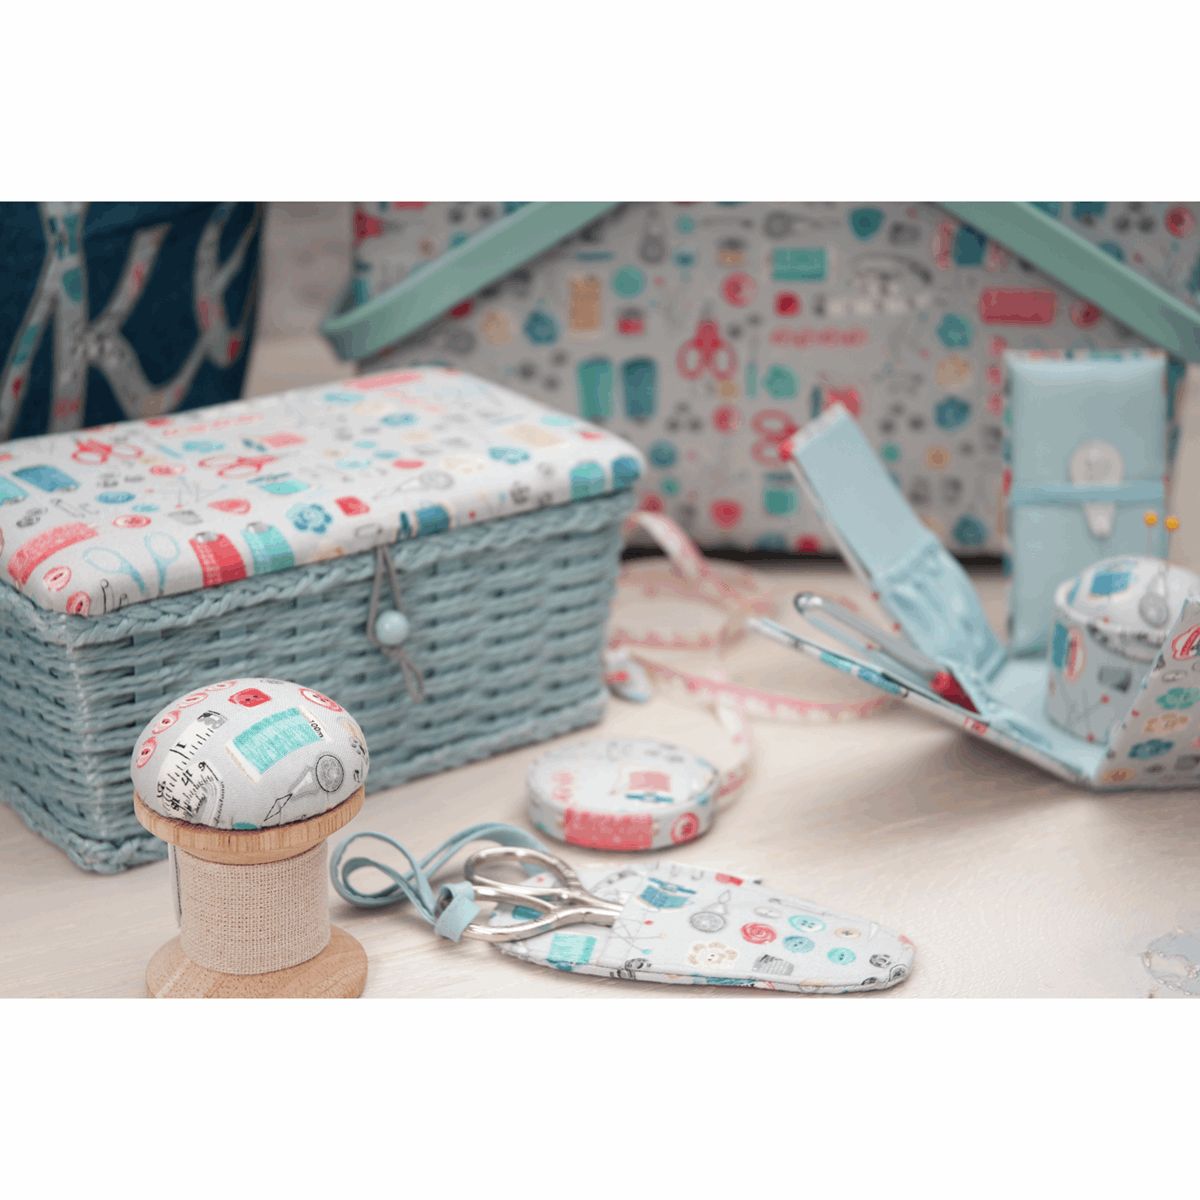 SEWING BOX - WOVEN BASKET - STITCH IN TIME